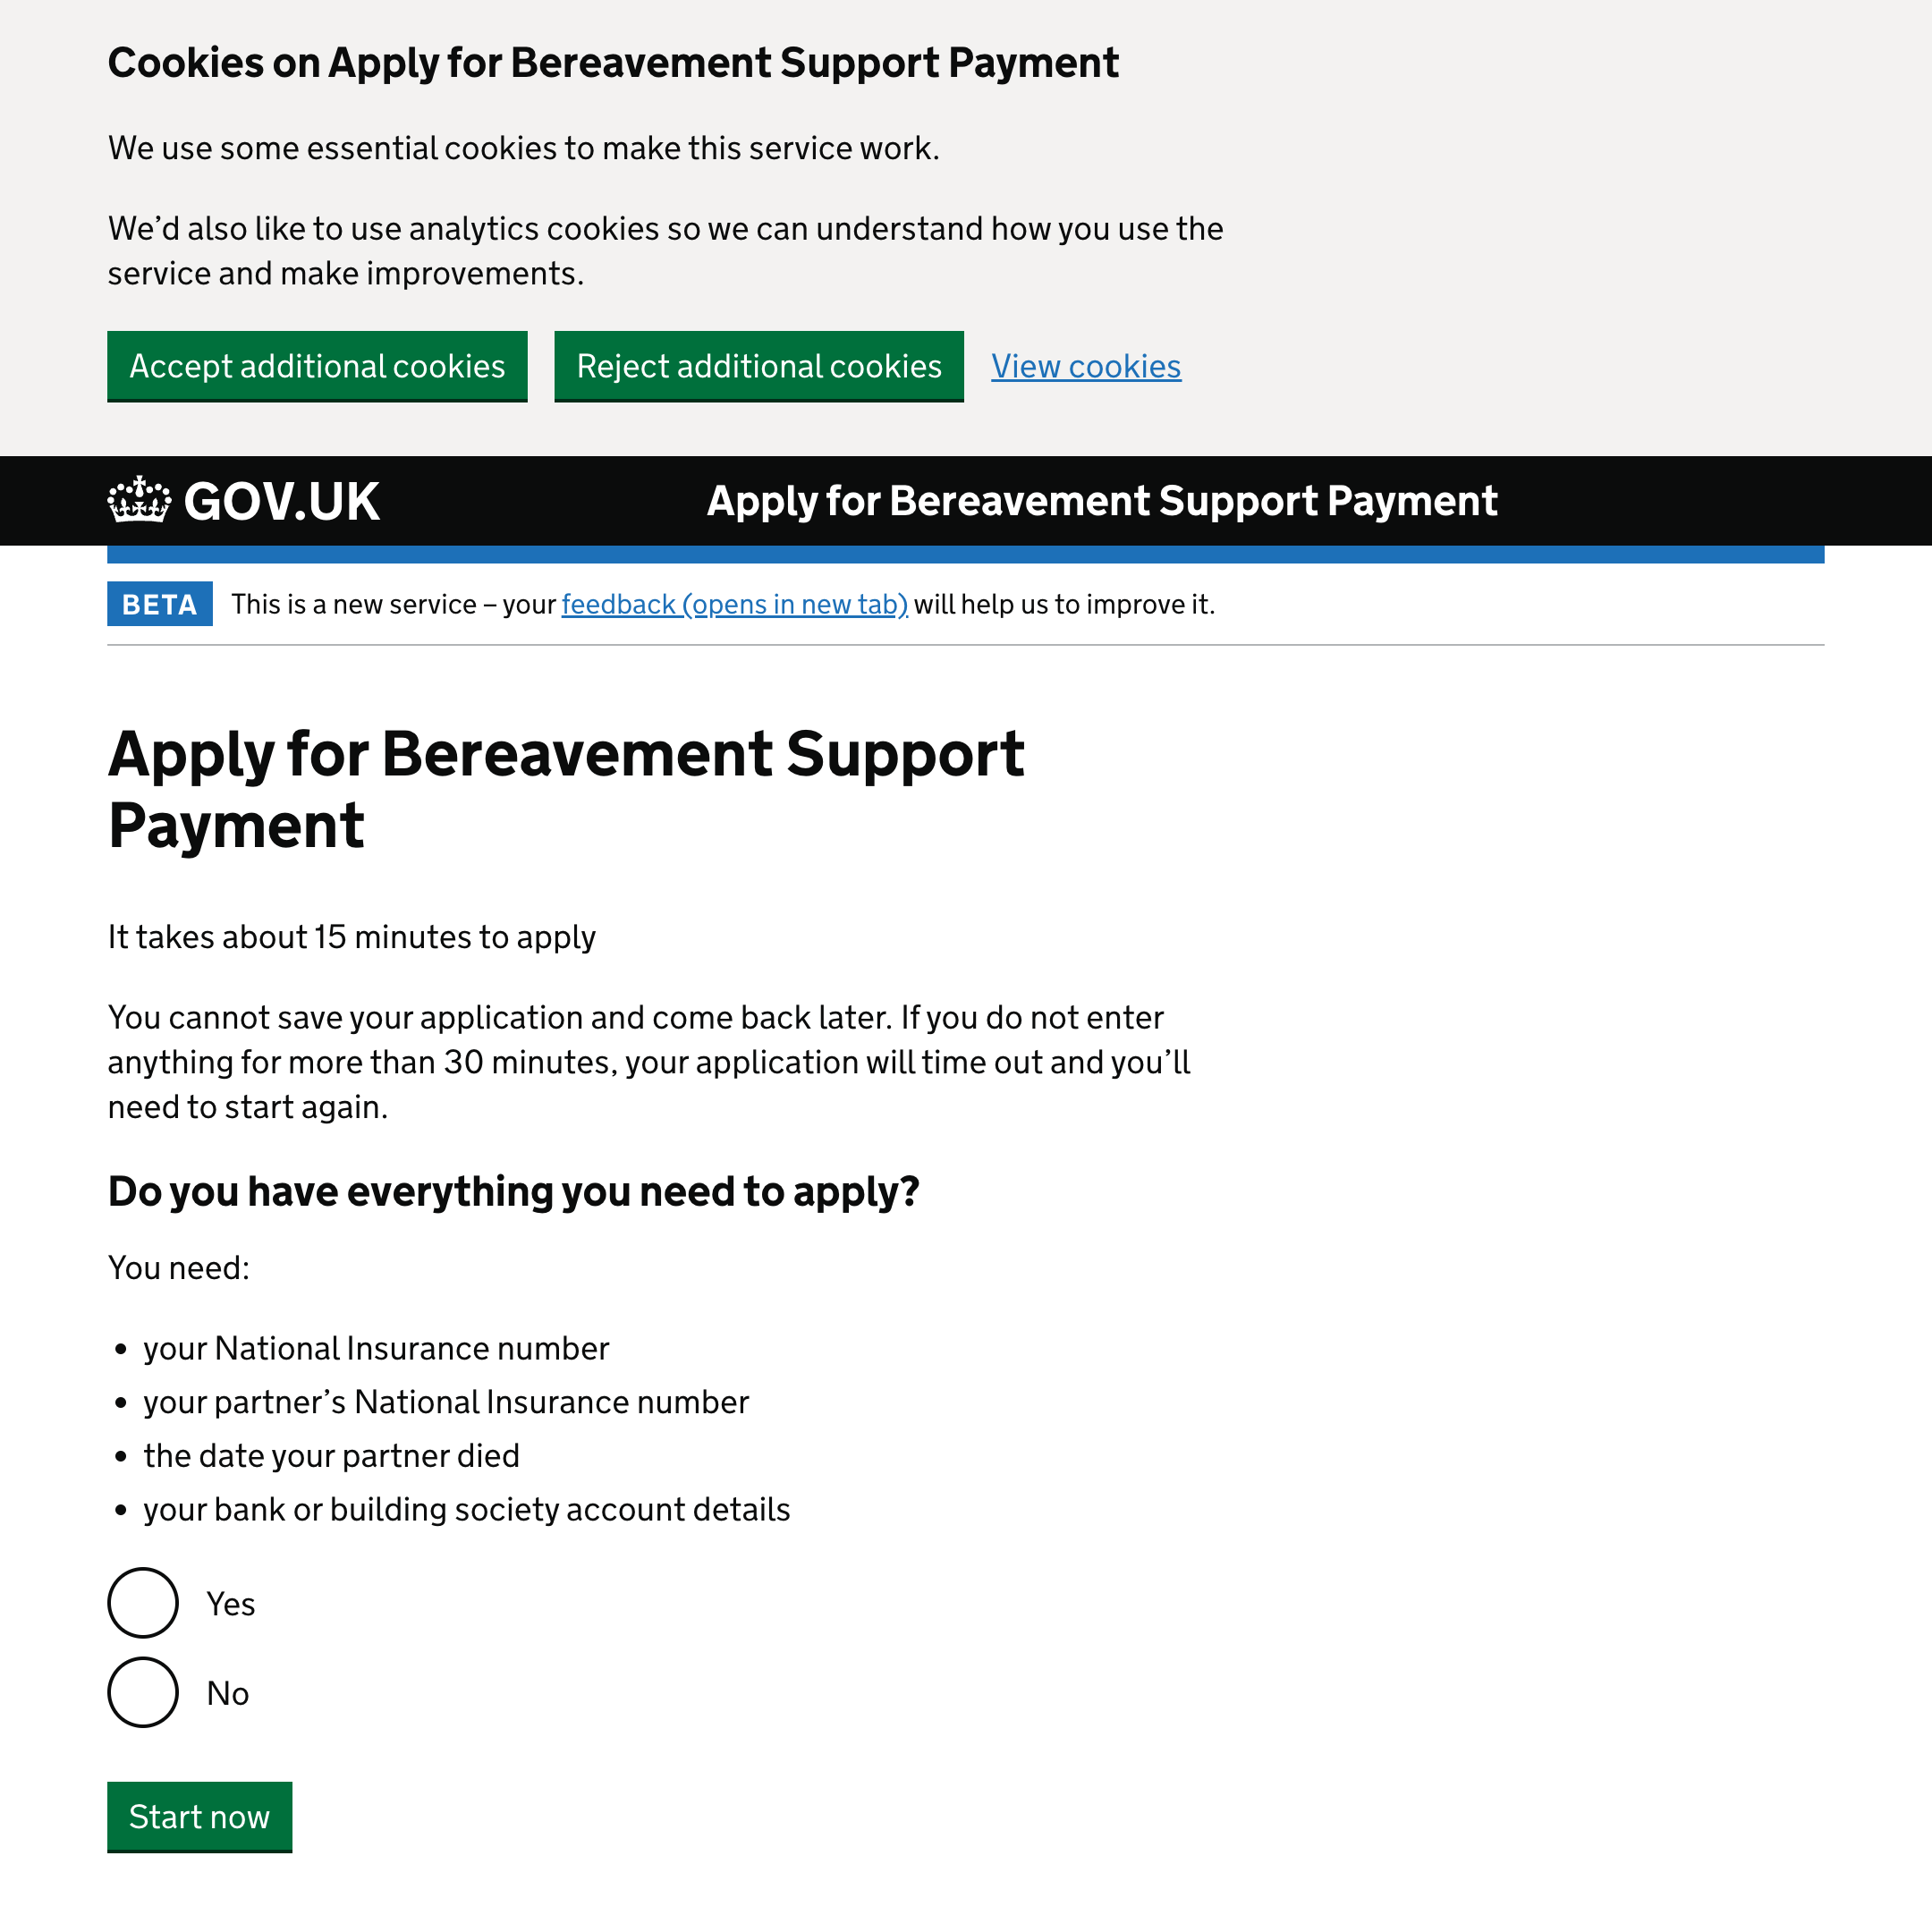 Apply for Bereavement Support Payment